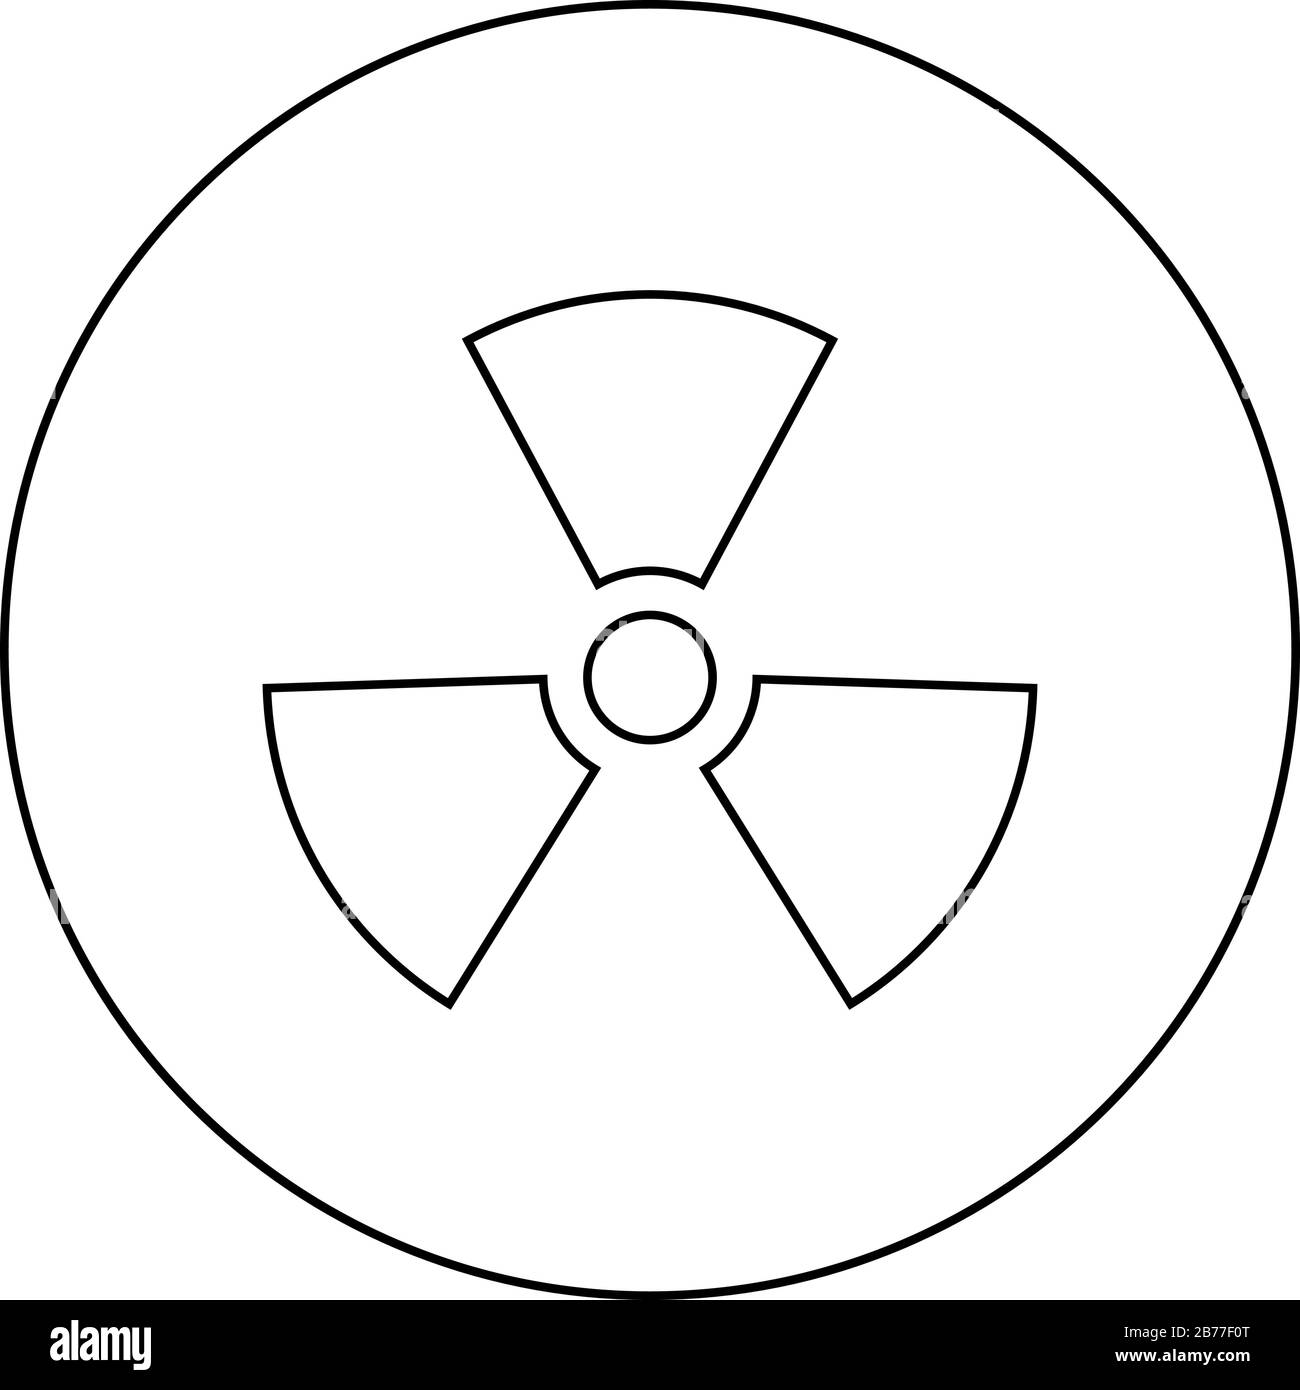 Radioactivity Symbol Nuclear sign icon in circle round outline black color vector illustration flat style simple image Stock Vector